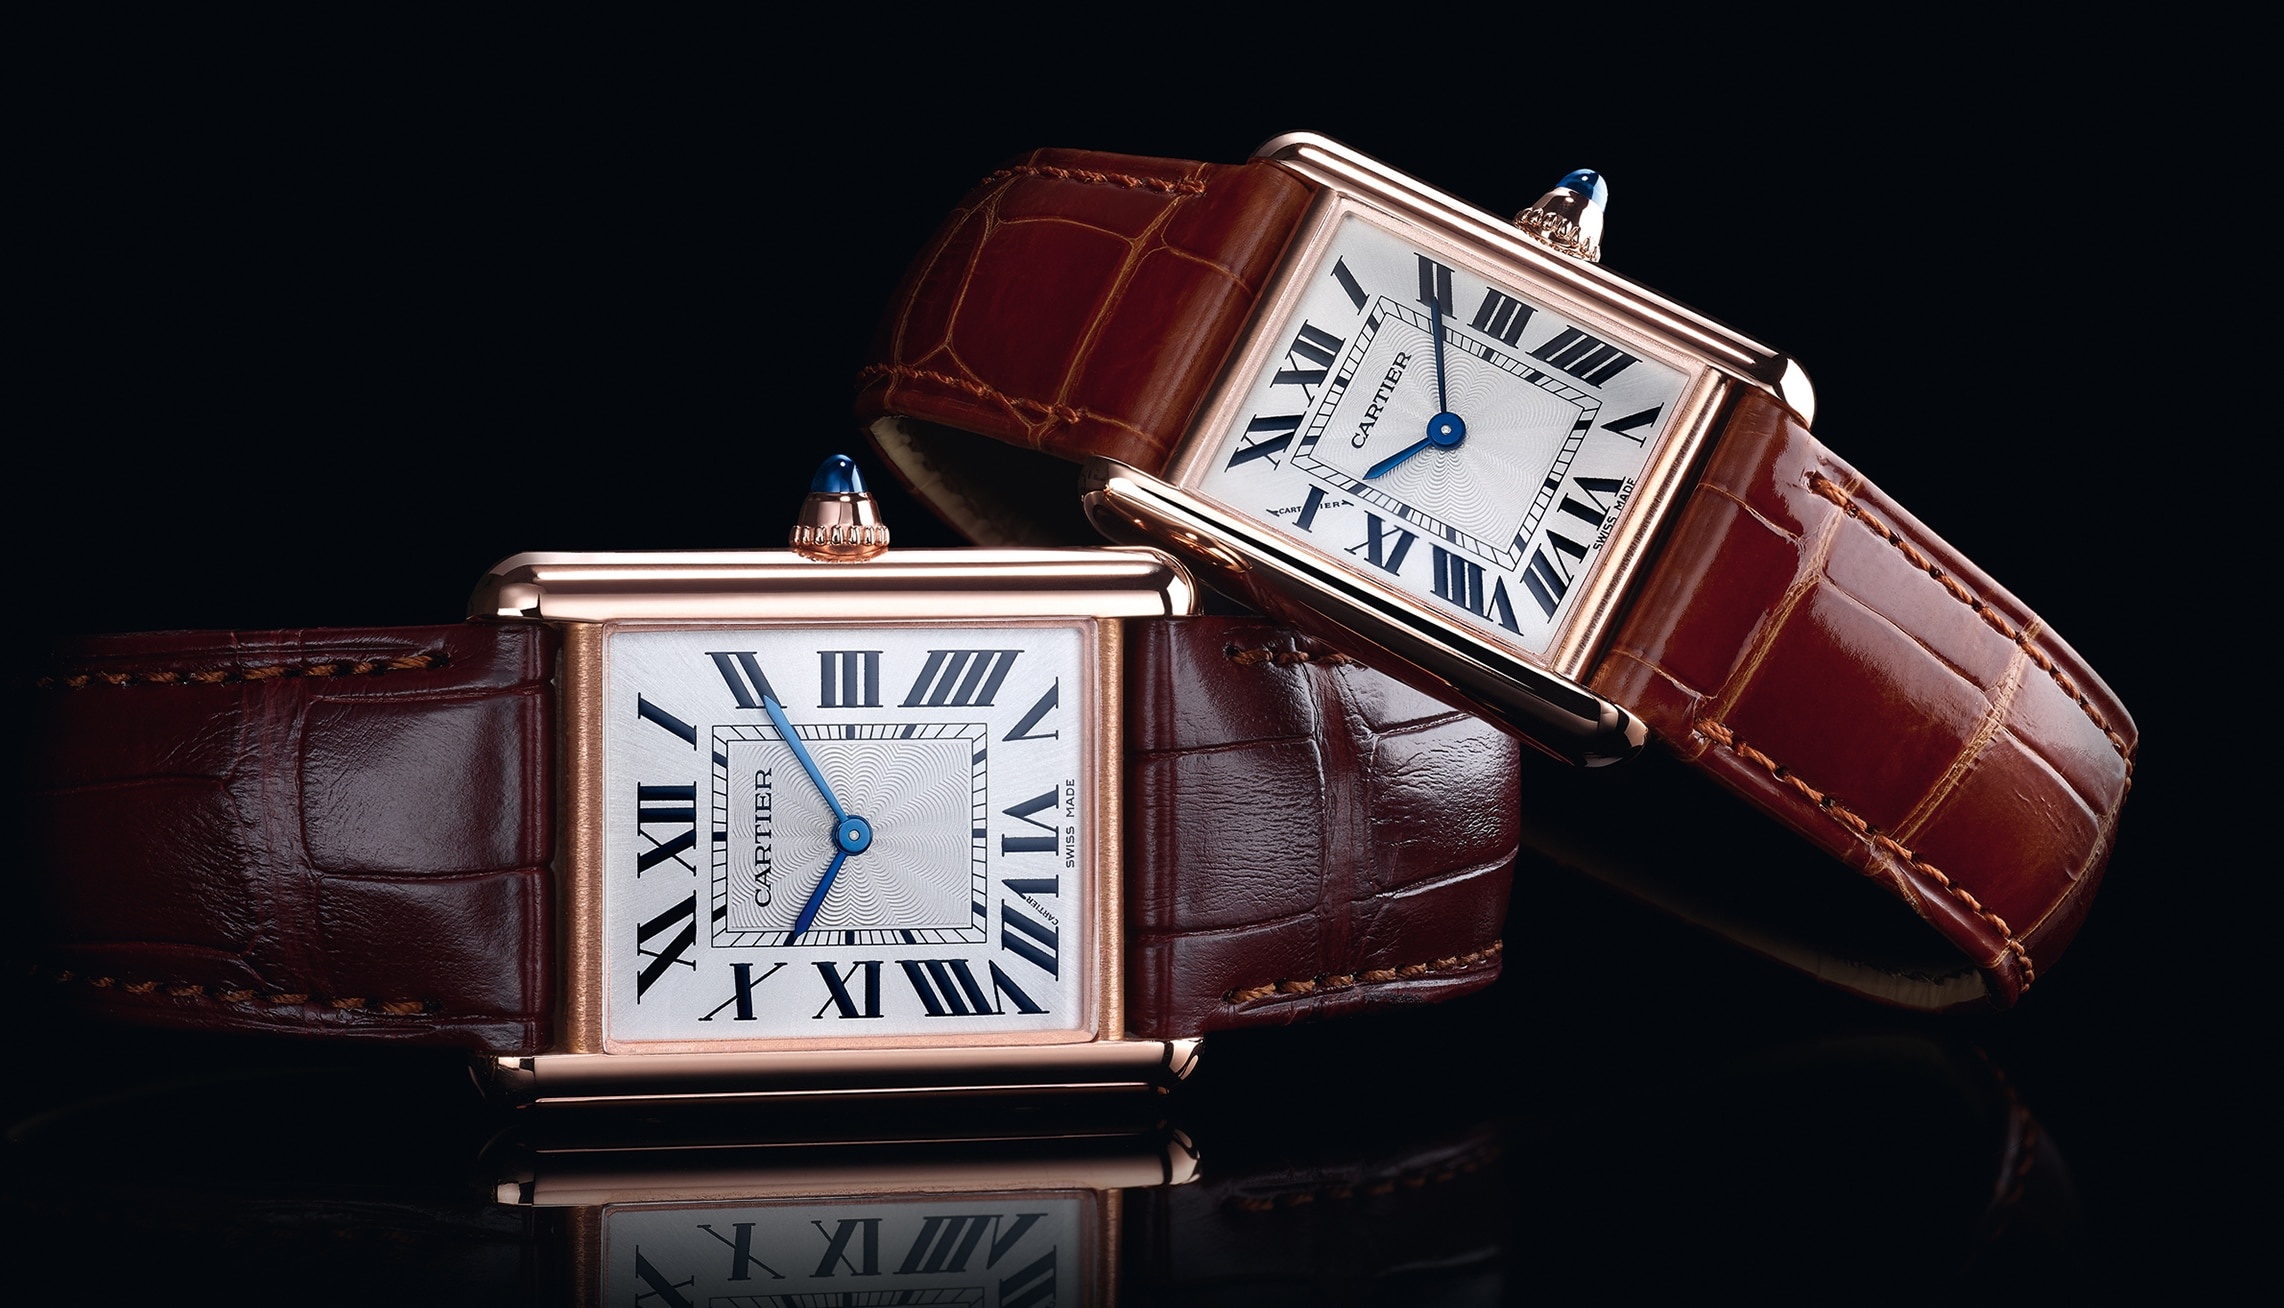 Cartier: A French luxury goods brand, Designs and manufactures high-end watches and jewelry. 2290x1310 HD Background.